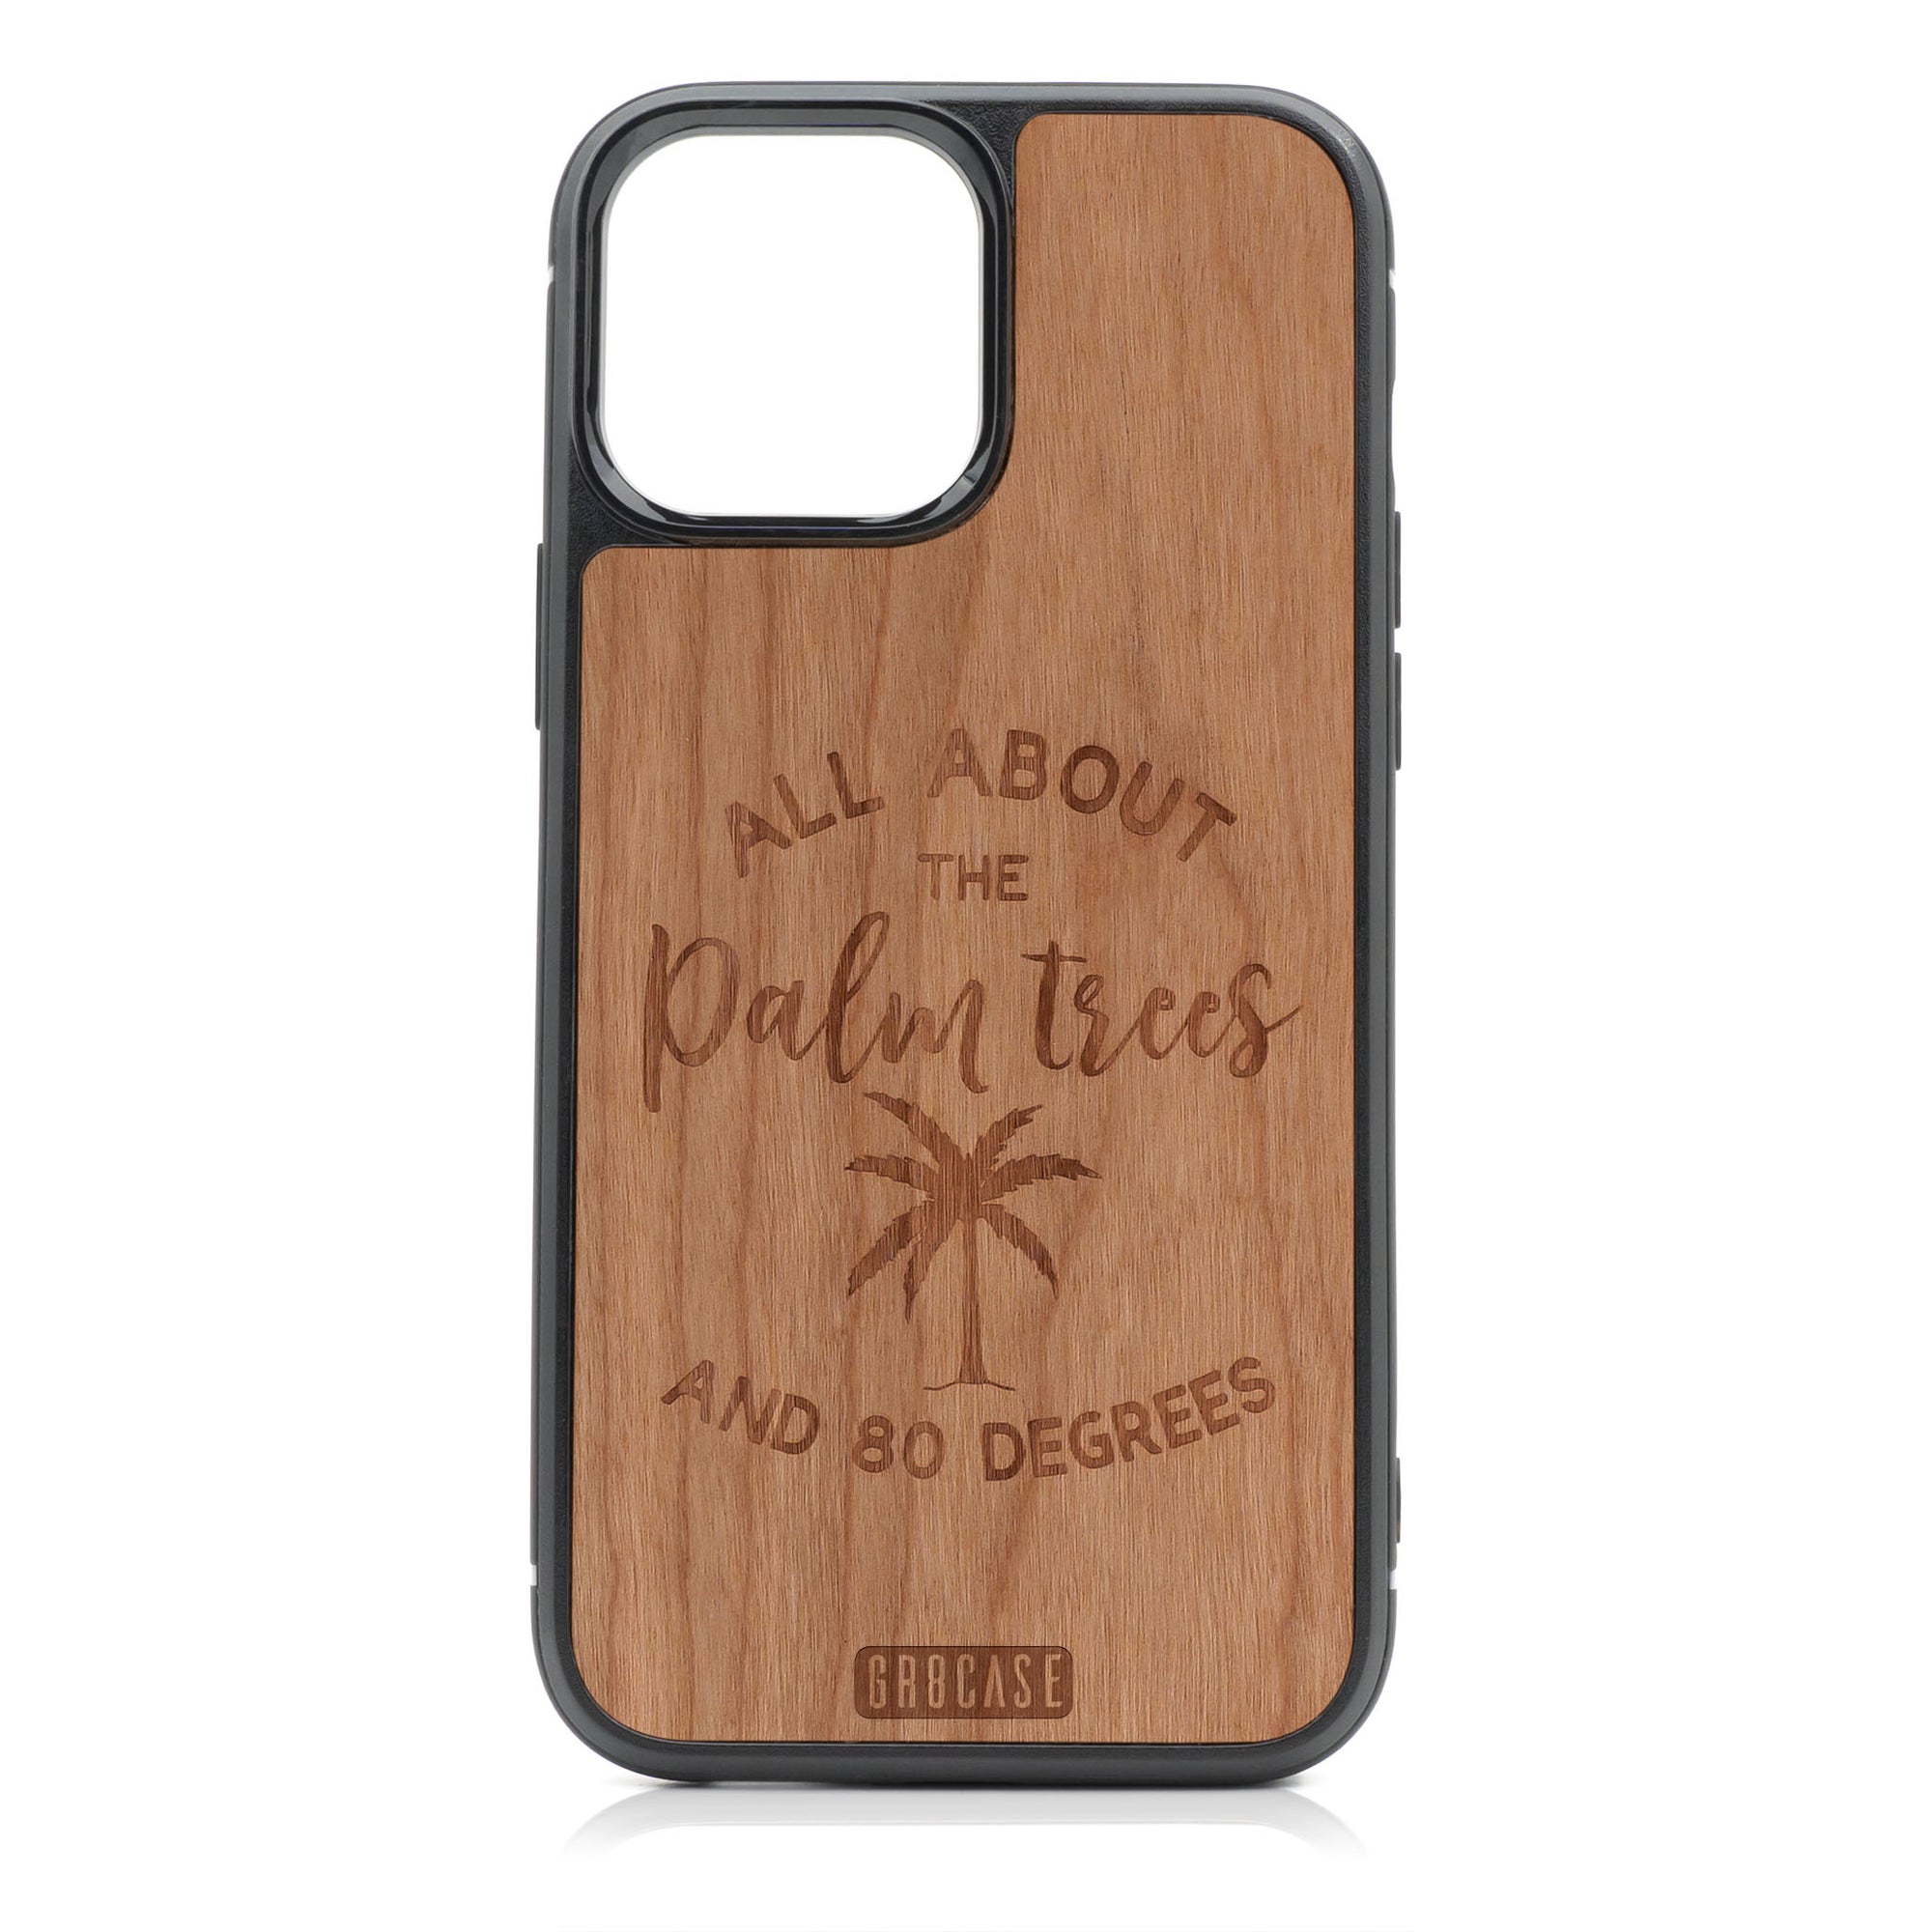 All About The Palm Trees And 80 Degree Design Wood Case For iPhone 13 Pro Max